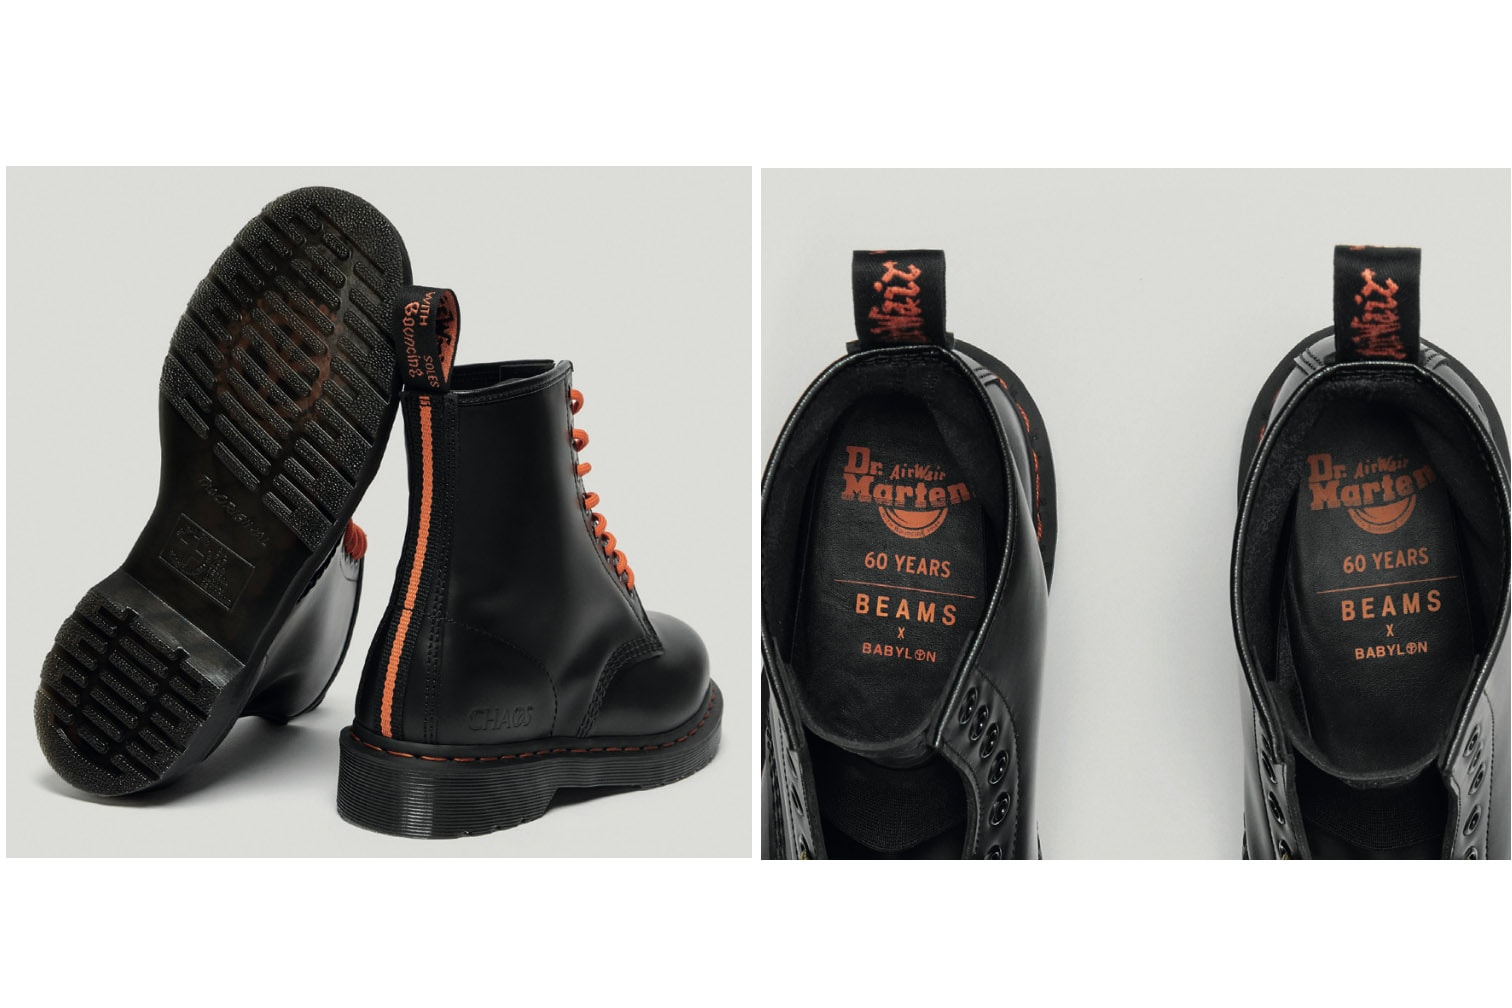 Dr. Martens x Beams x Babylon 1460 Remastered Boot Silhouette Release Collaboration Limited Edition